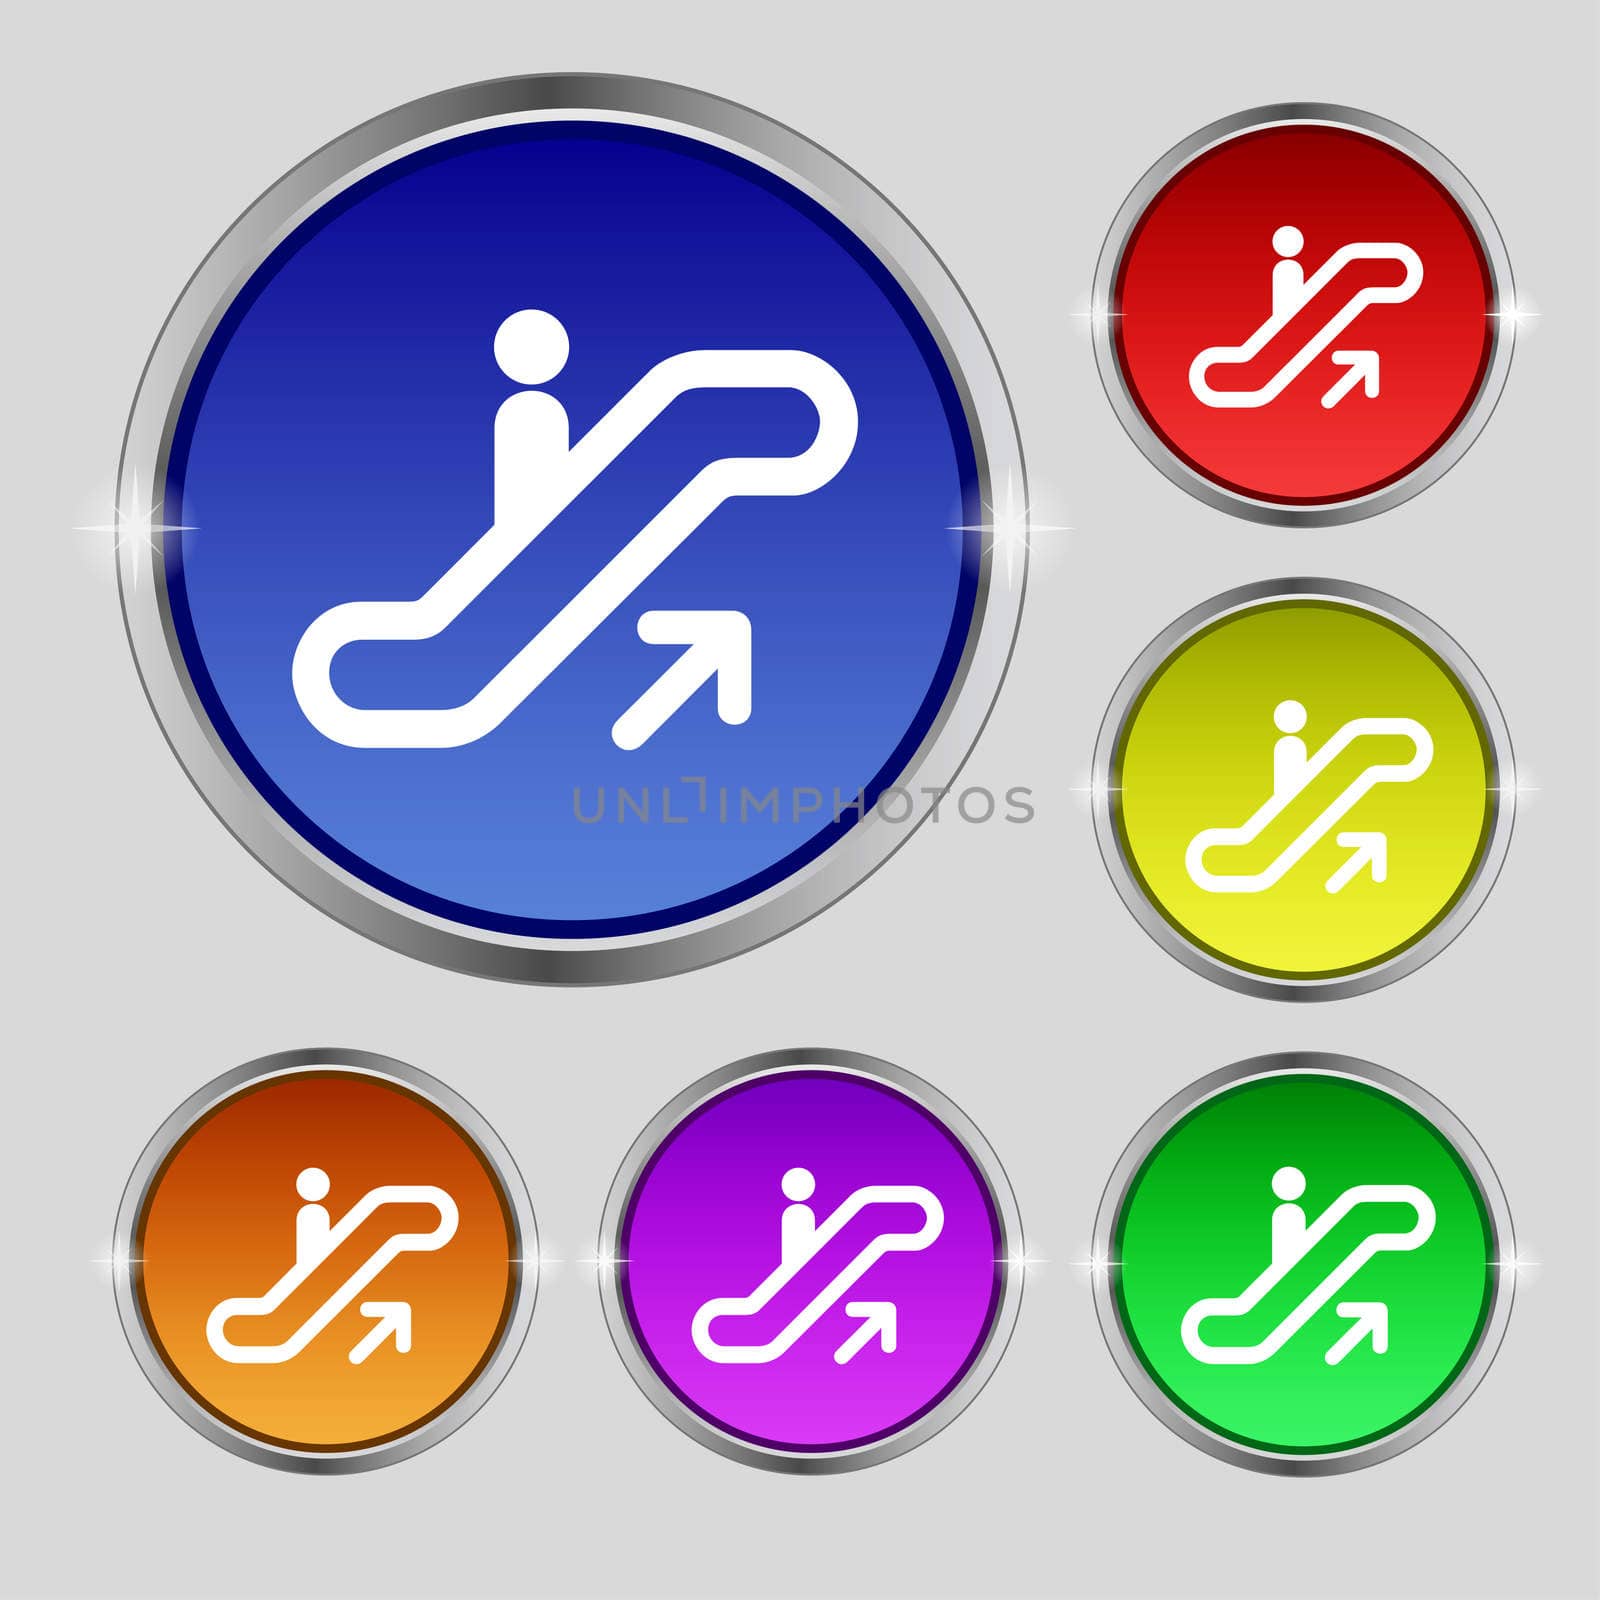 elevator, Escalator, Staircase icon sign. Round symbol on bright colourful buttons.  by serhii_lohvyniuk